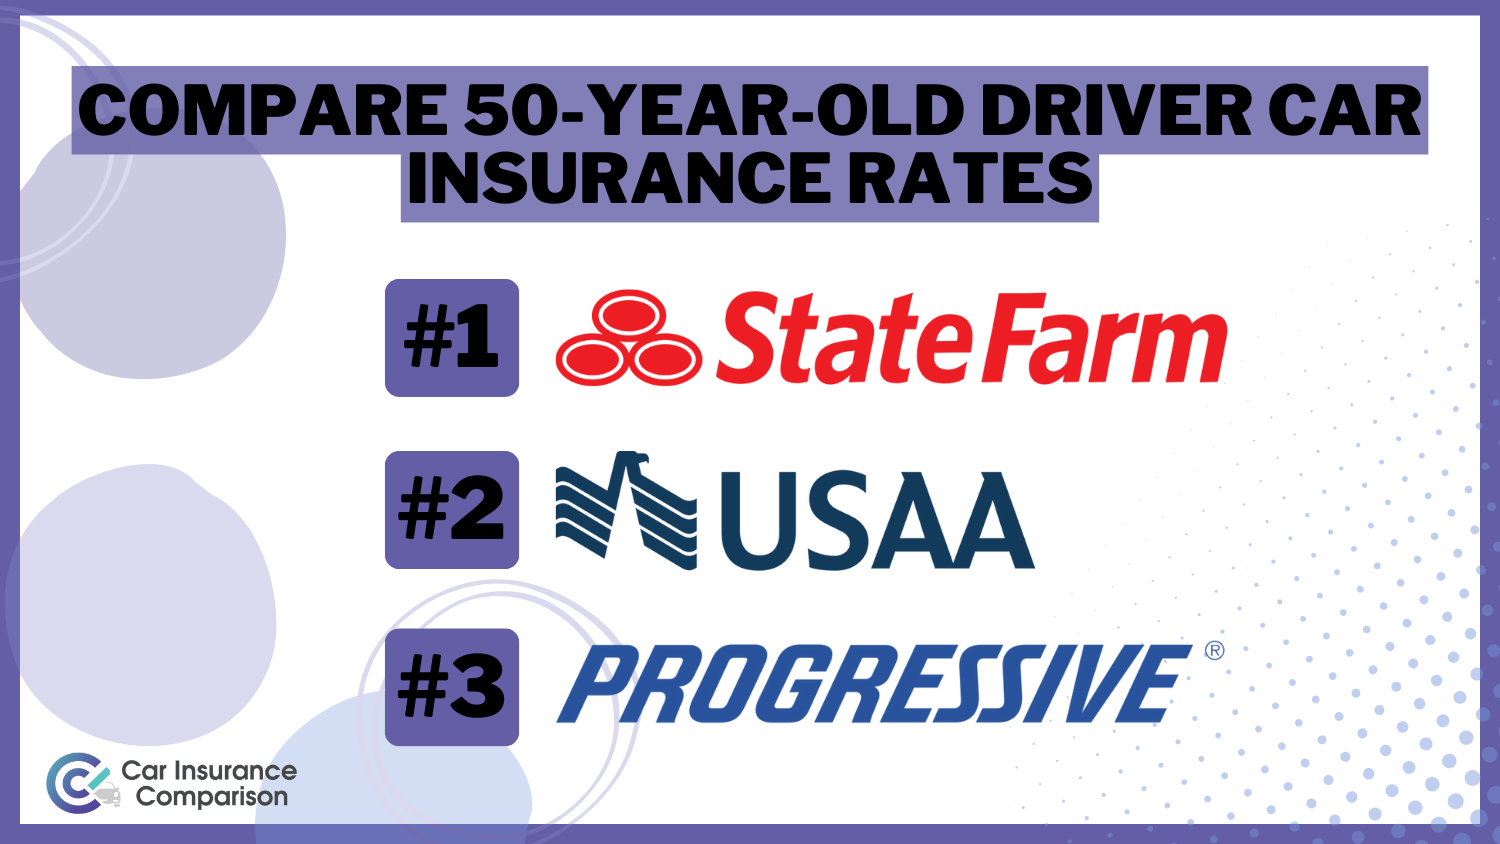 Compare-50-Year-Old-Driver-Car-Insurance-Rates: State Farm, USAA, and Progressive.